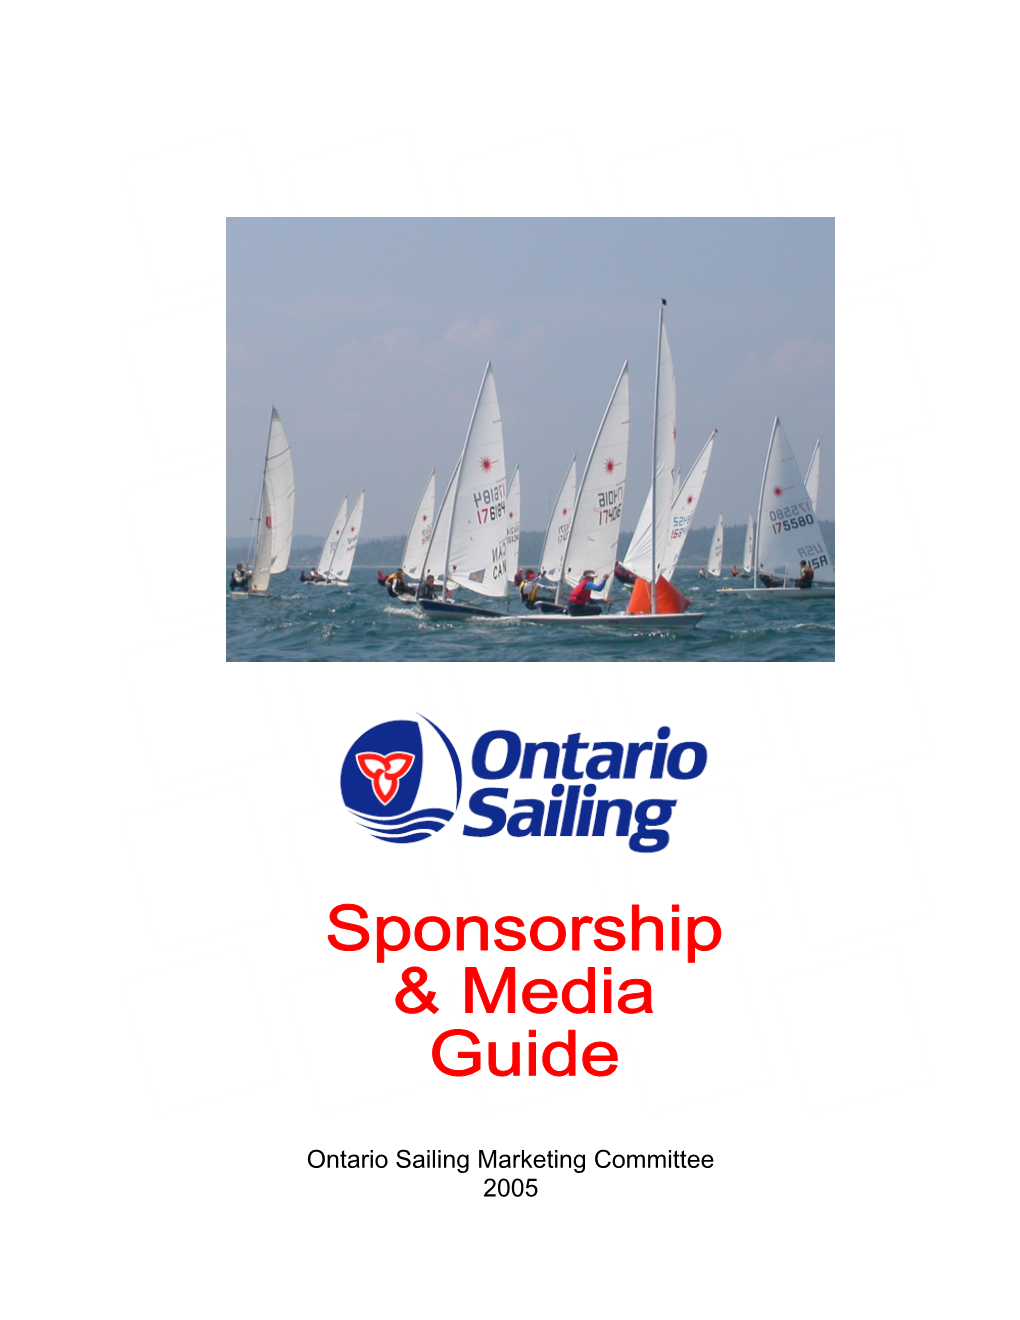 Congratulations and Thank You for Hosting an Ontario Sailing Event